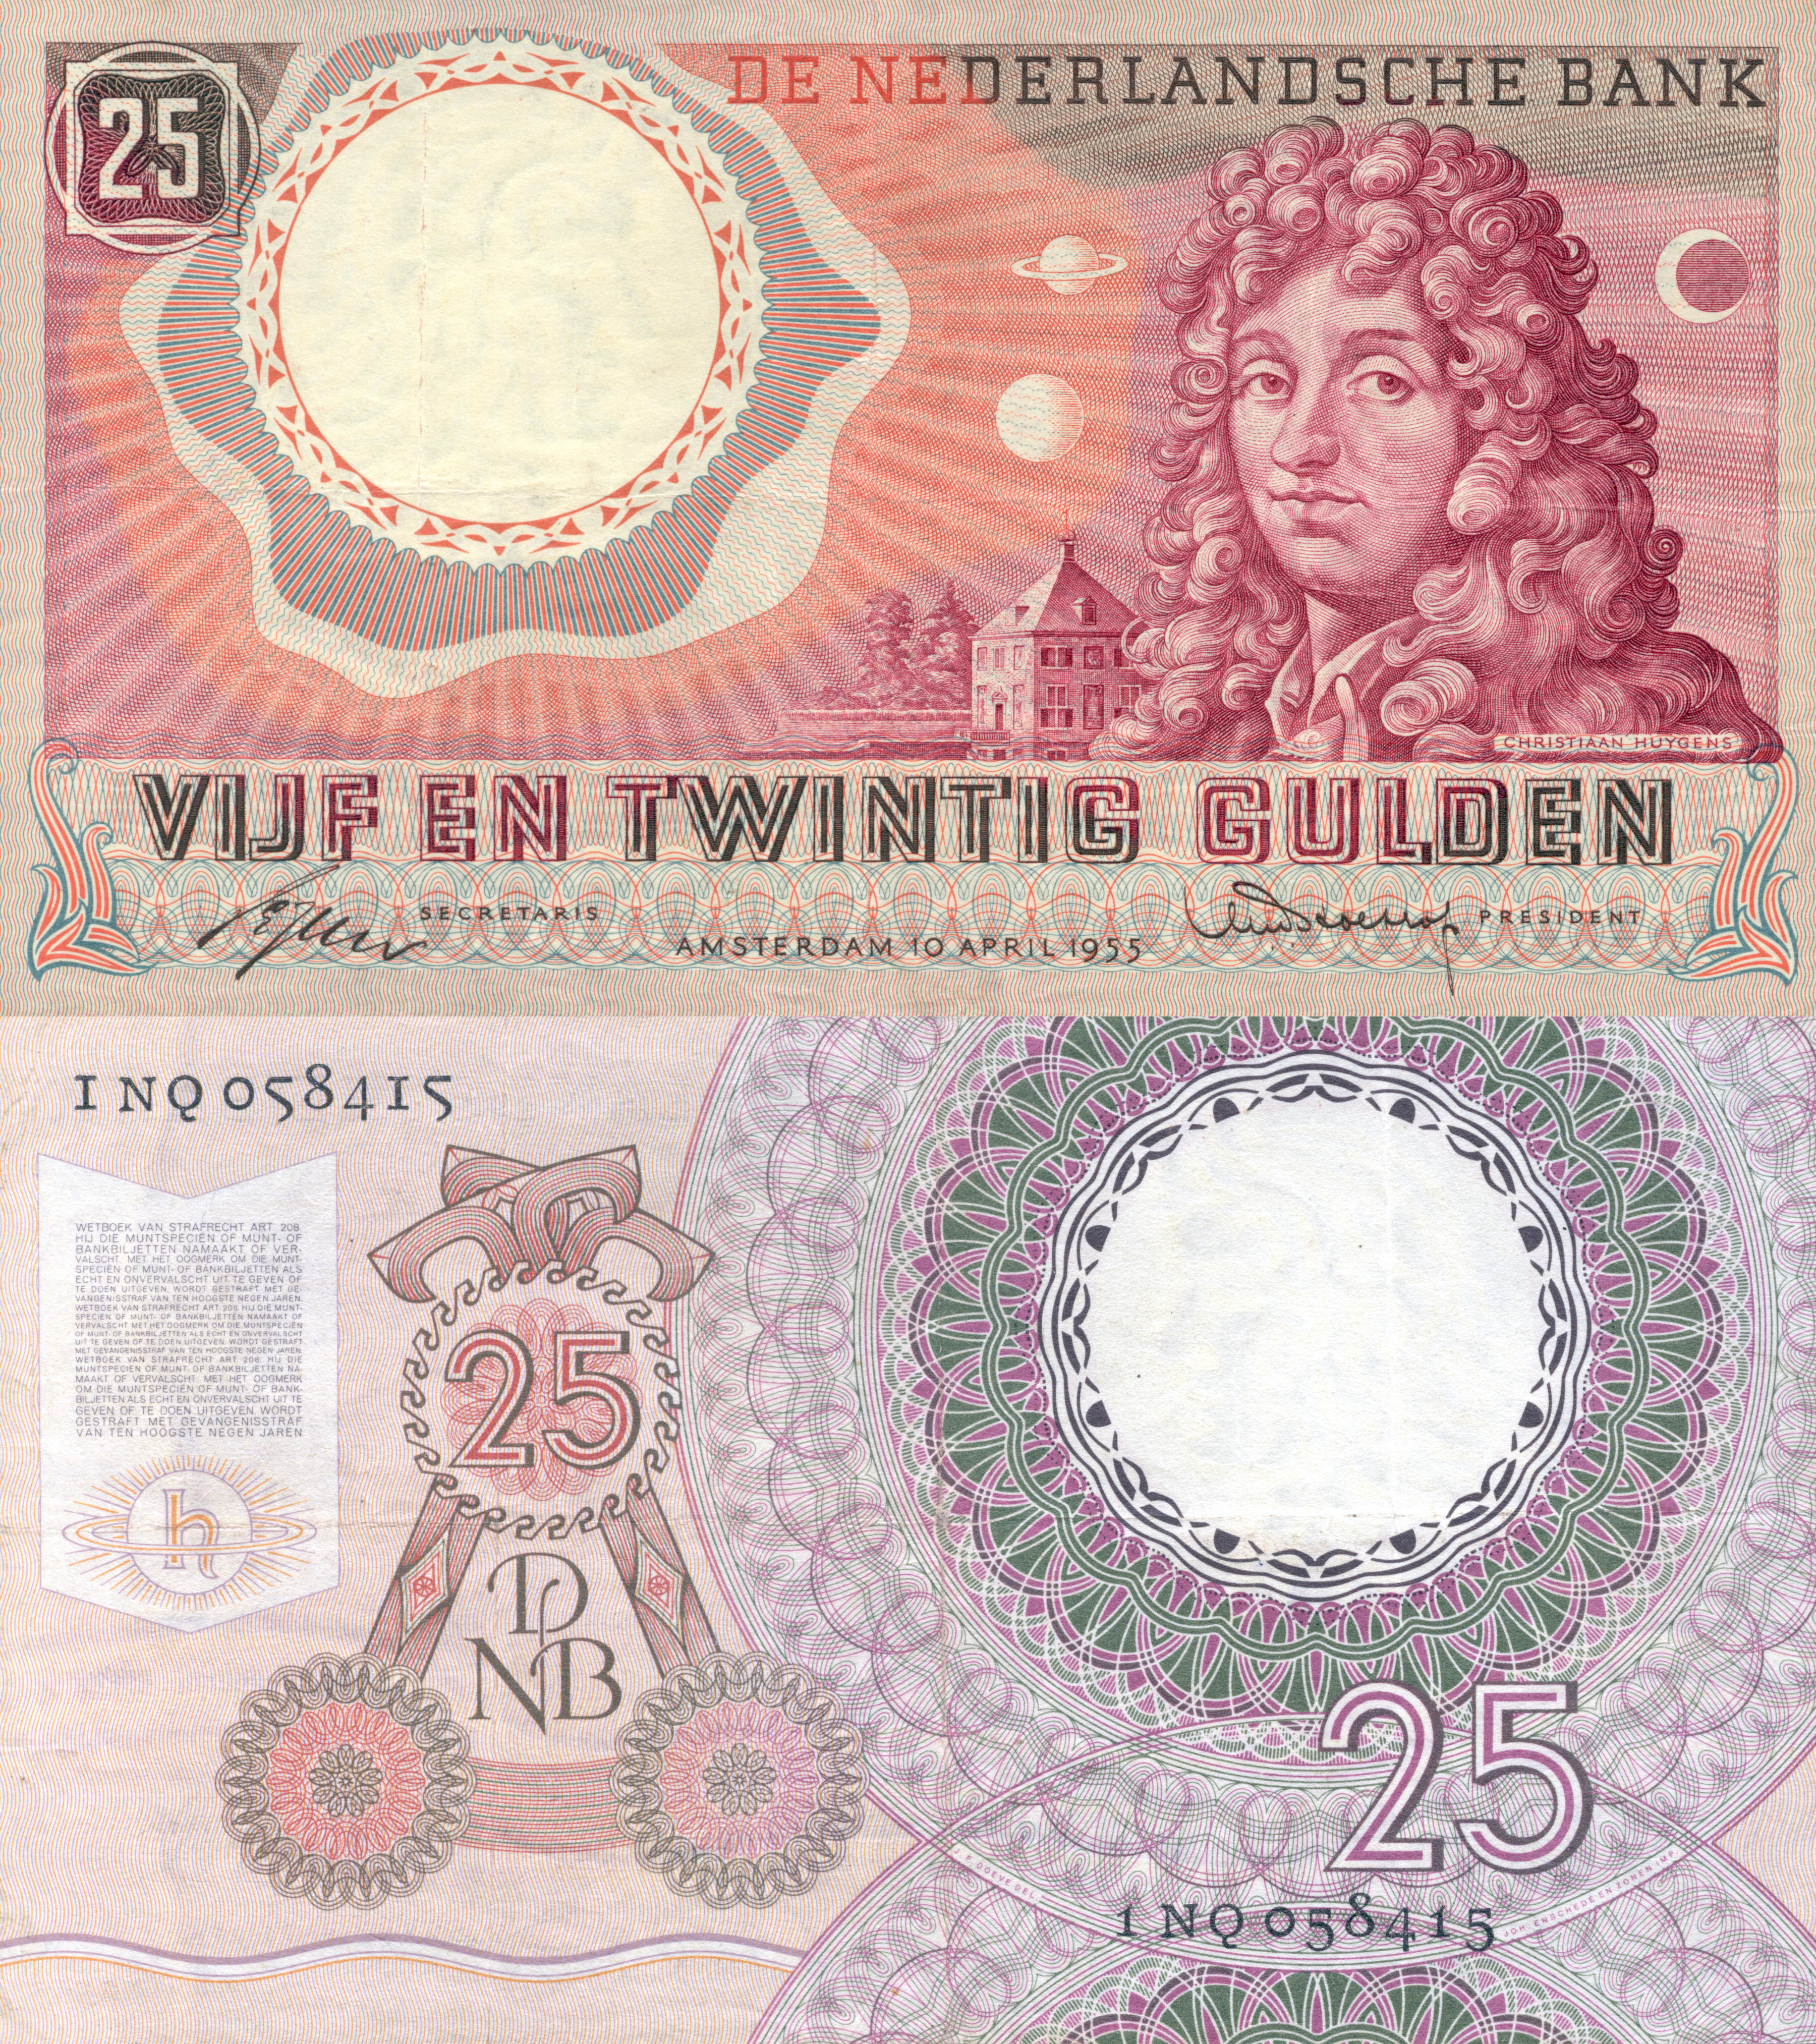 Foreign, Currency, Uncirculated Money & Banking Braides Hobbies and Games Chile 1 Escudos Banknote World Paper Money UNC Currency Pick p136 1964 Bill Note 